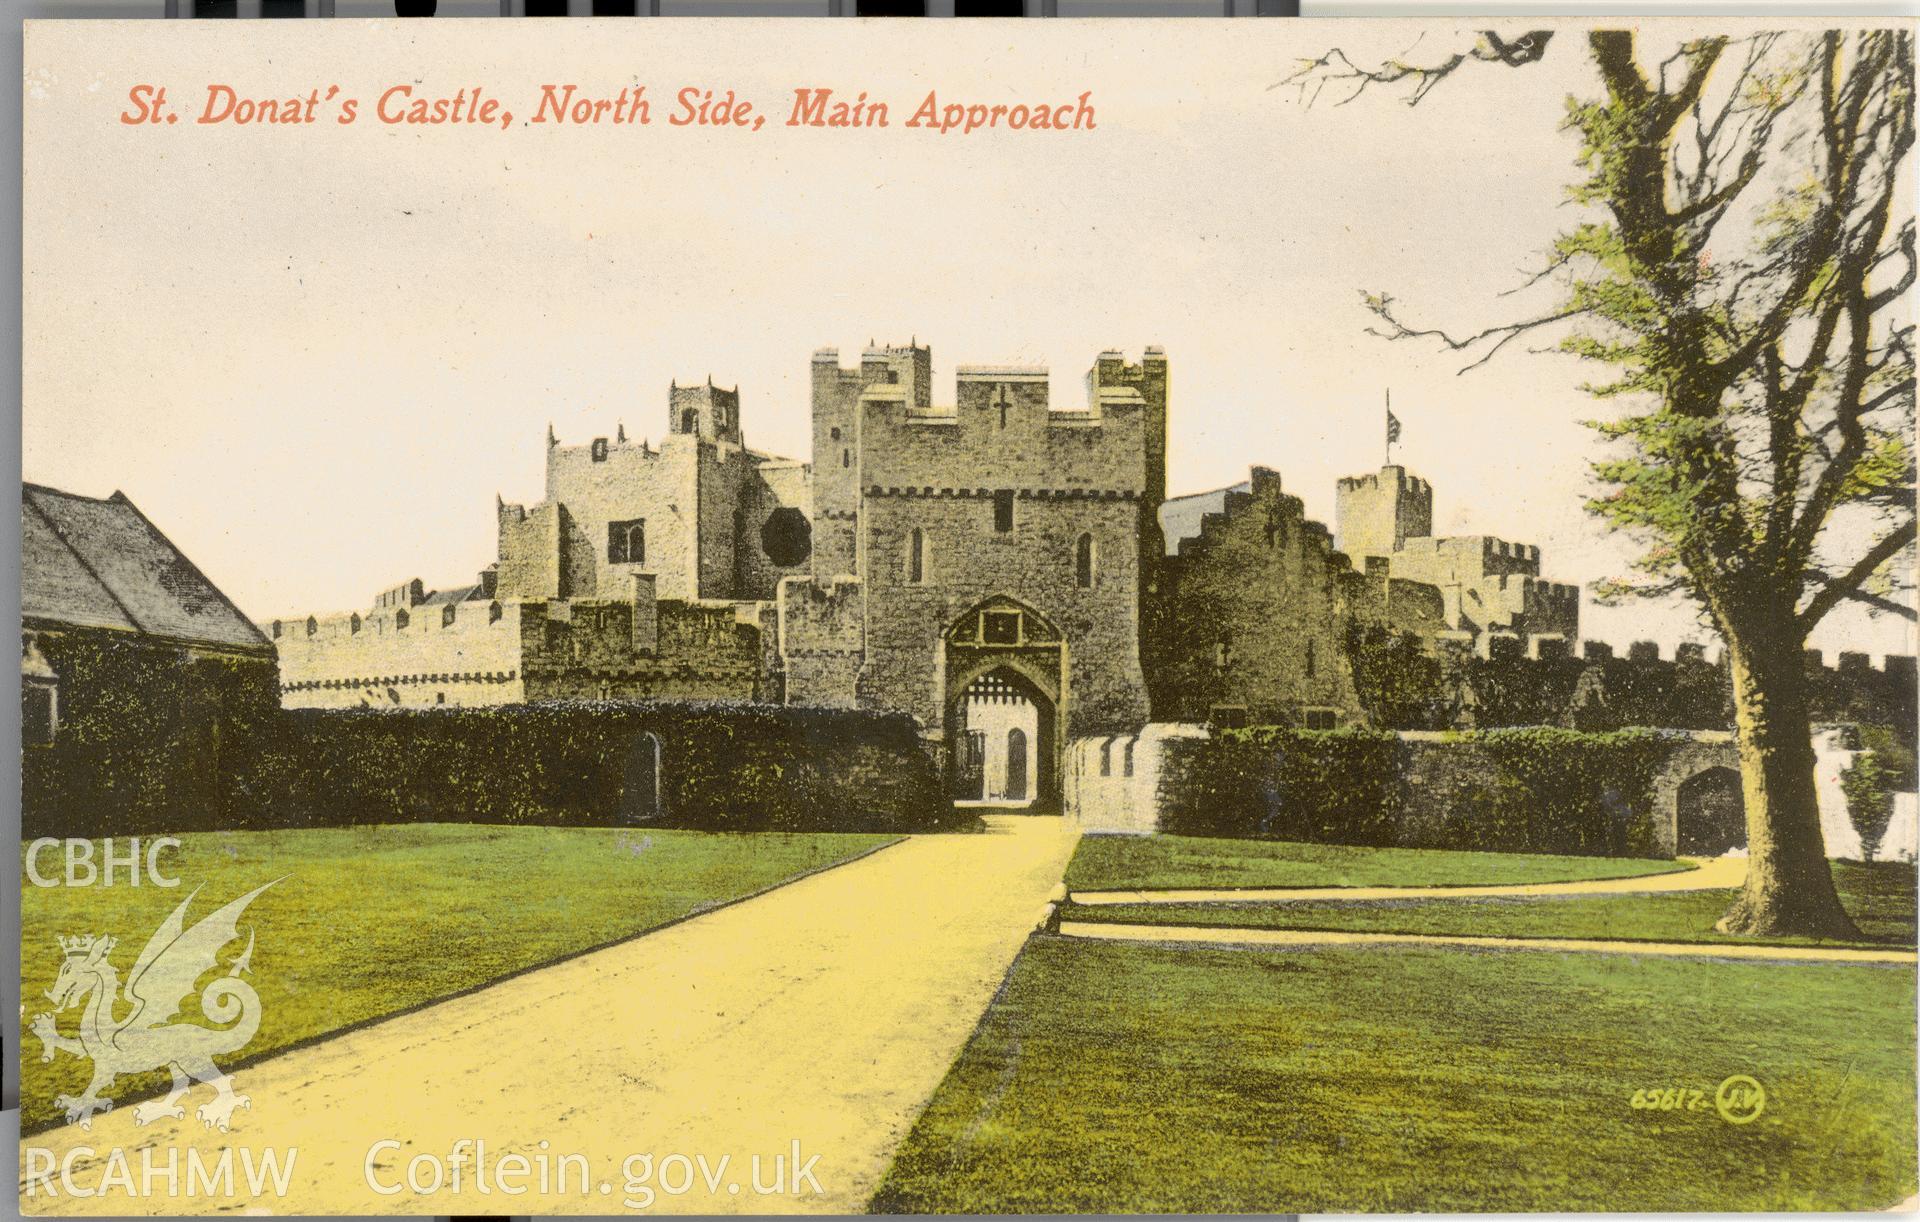 Digitised postcard image of St Donat's Castle, with Castle gate, Valentine's Series. Produced by Parks and Gardens Data Services, from an original item in the Peter Davis Collection at Parks and Gardens UK. We hold only web-resolution images of this collection, suitable for viewing on screen and for research purposes only. We do not hold the original images, or publication quality scans.